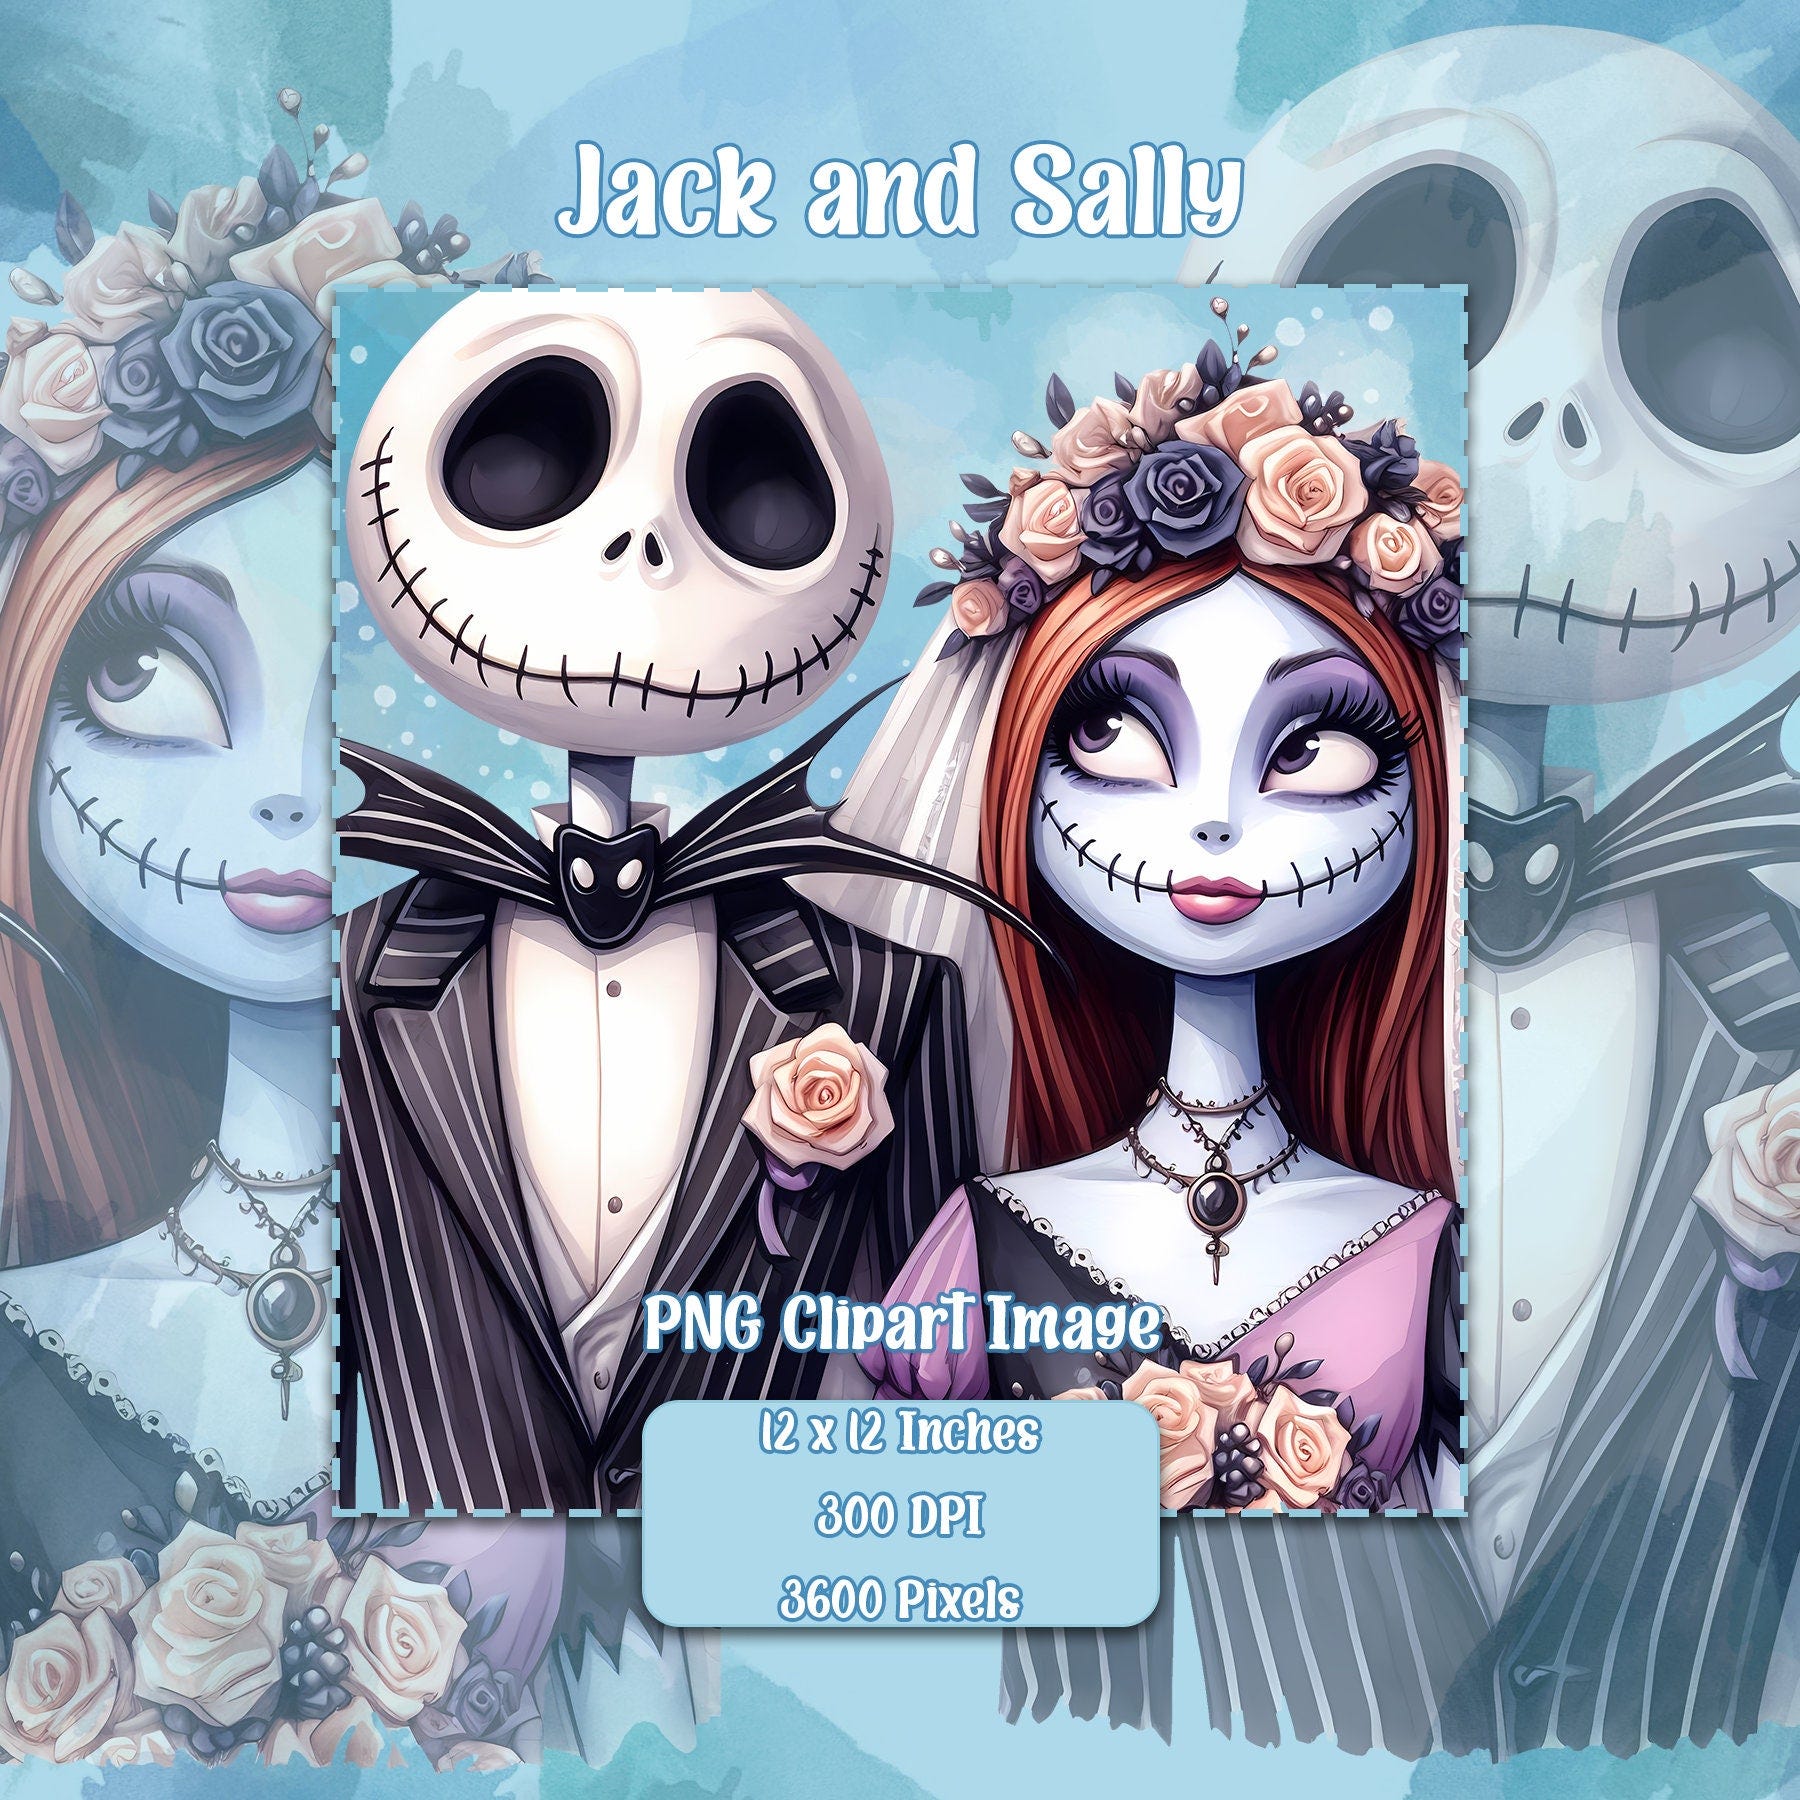 Jack and Sally Wedding PNG, Transparent Background Clipart Images, Commercial License Files, Nightmare Graphics